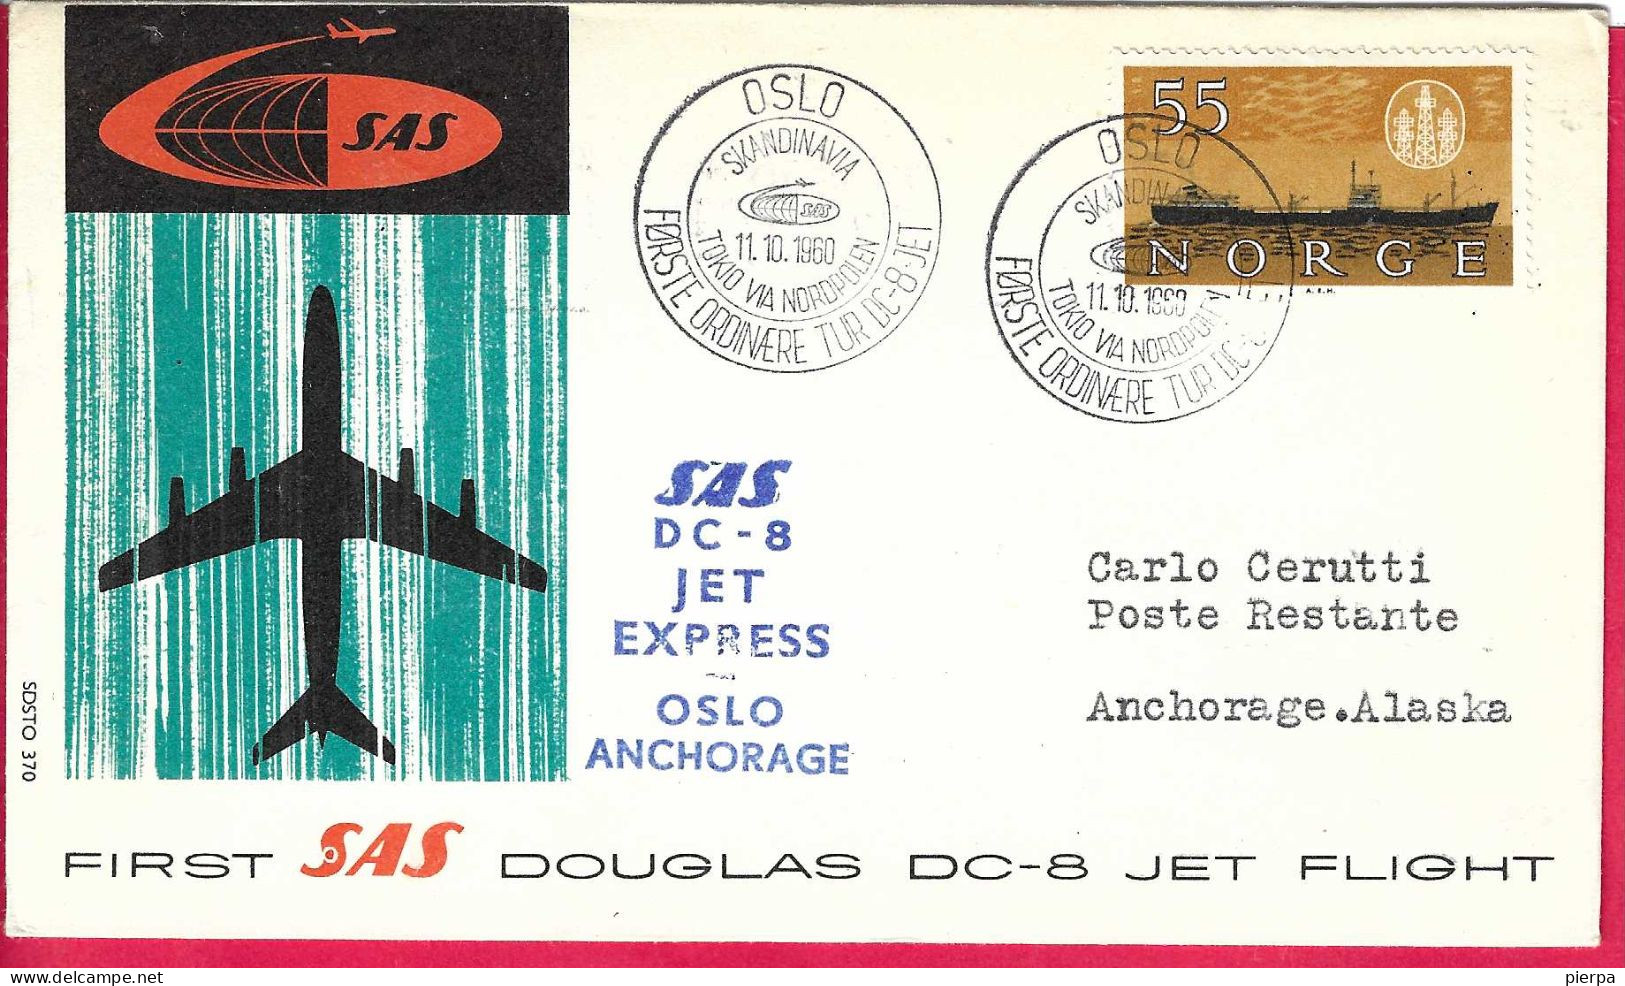 NORGE - FIRST DOUGLAS DC-8 FLIGHT - SAS - FROM OSLO TO ANCHORAGE *11.10.60* ON OFFICIAL COVER - Briefe U. Dokumente